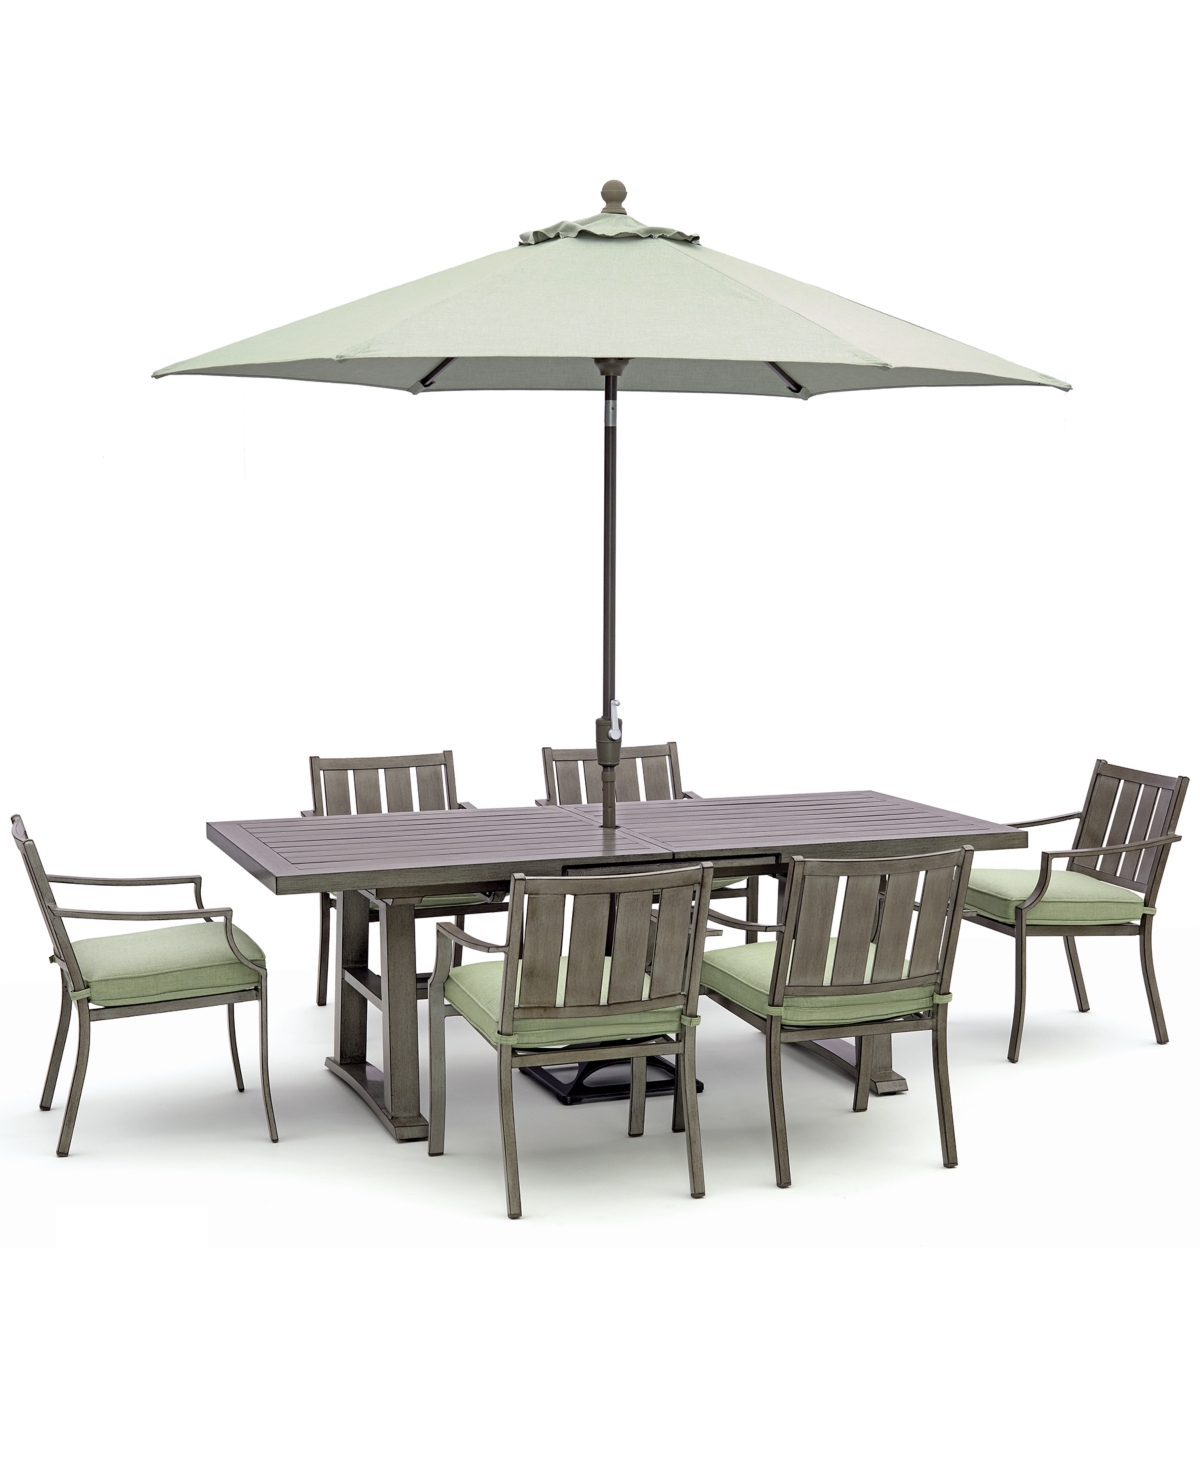 Wayland Outdoor Aluminum 7-Pc. Dining Set 87 x 40 (extends to 110) Extension Dining Table & 6 Dining Chairs, Created for Macys